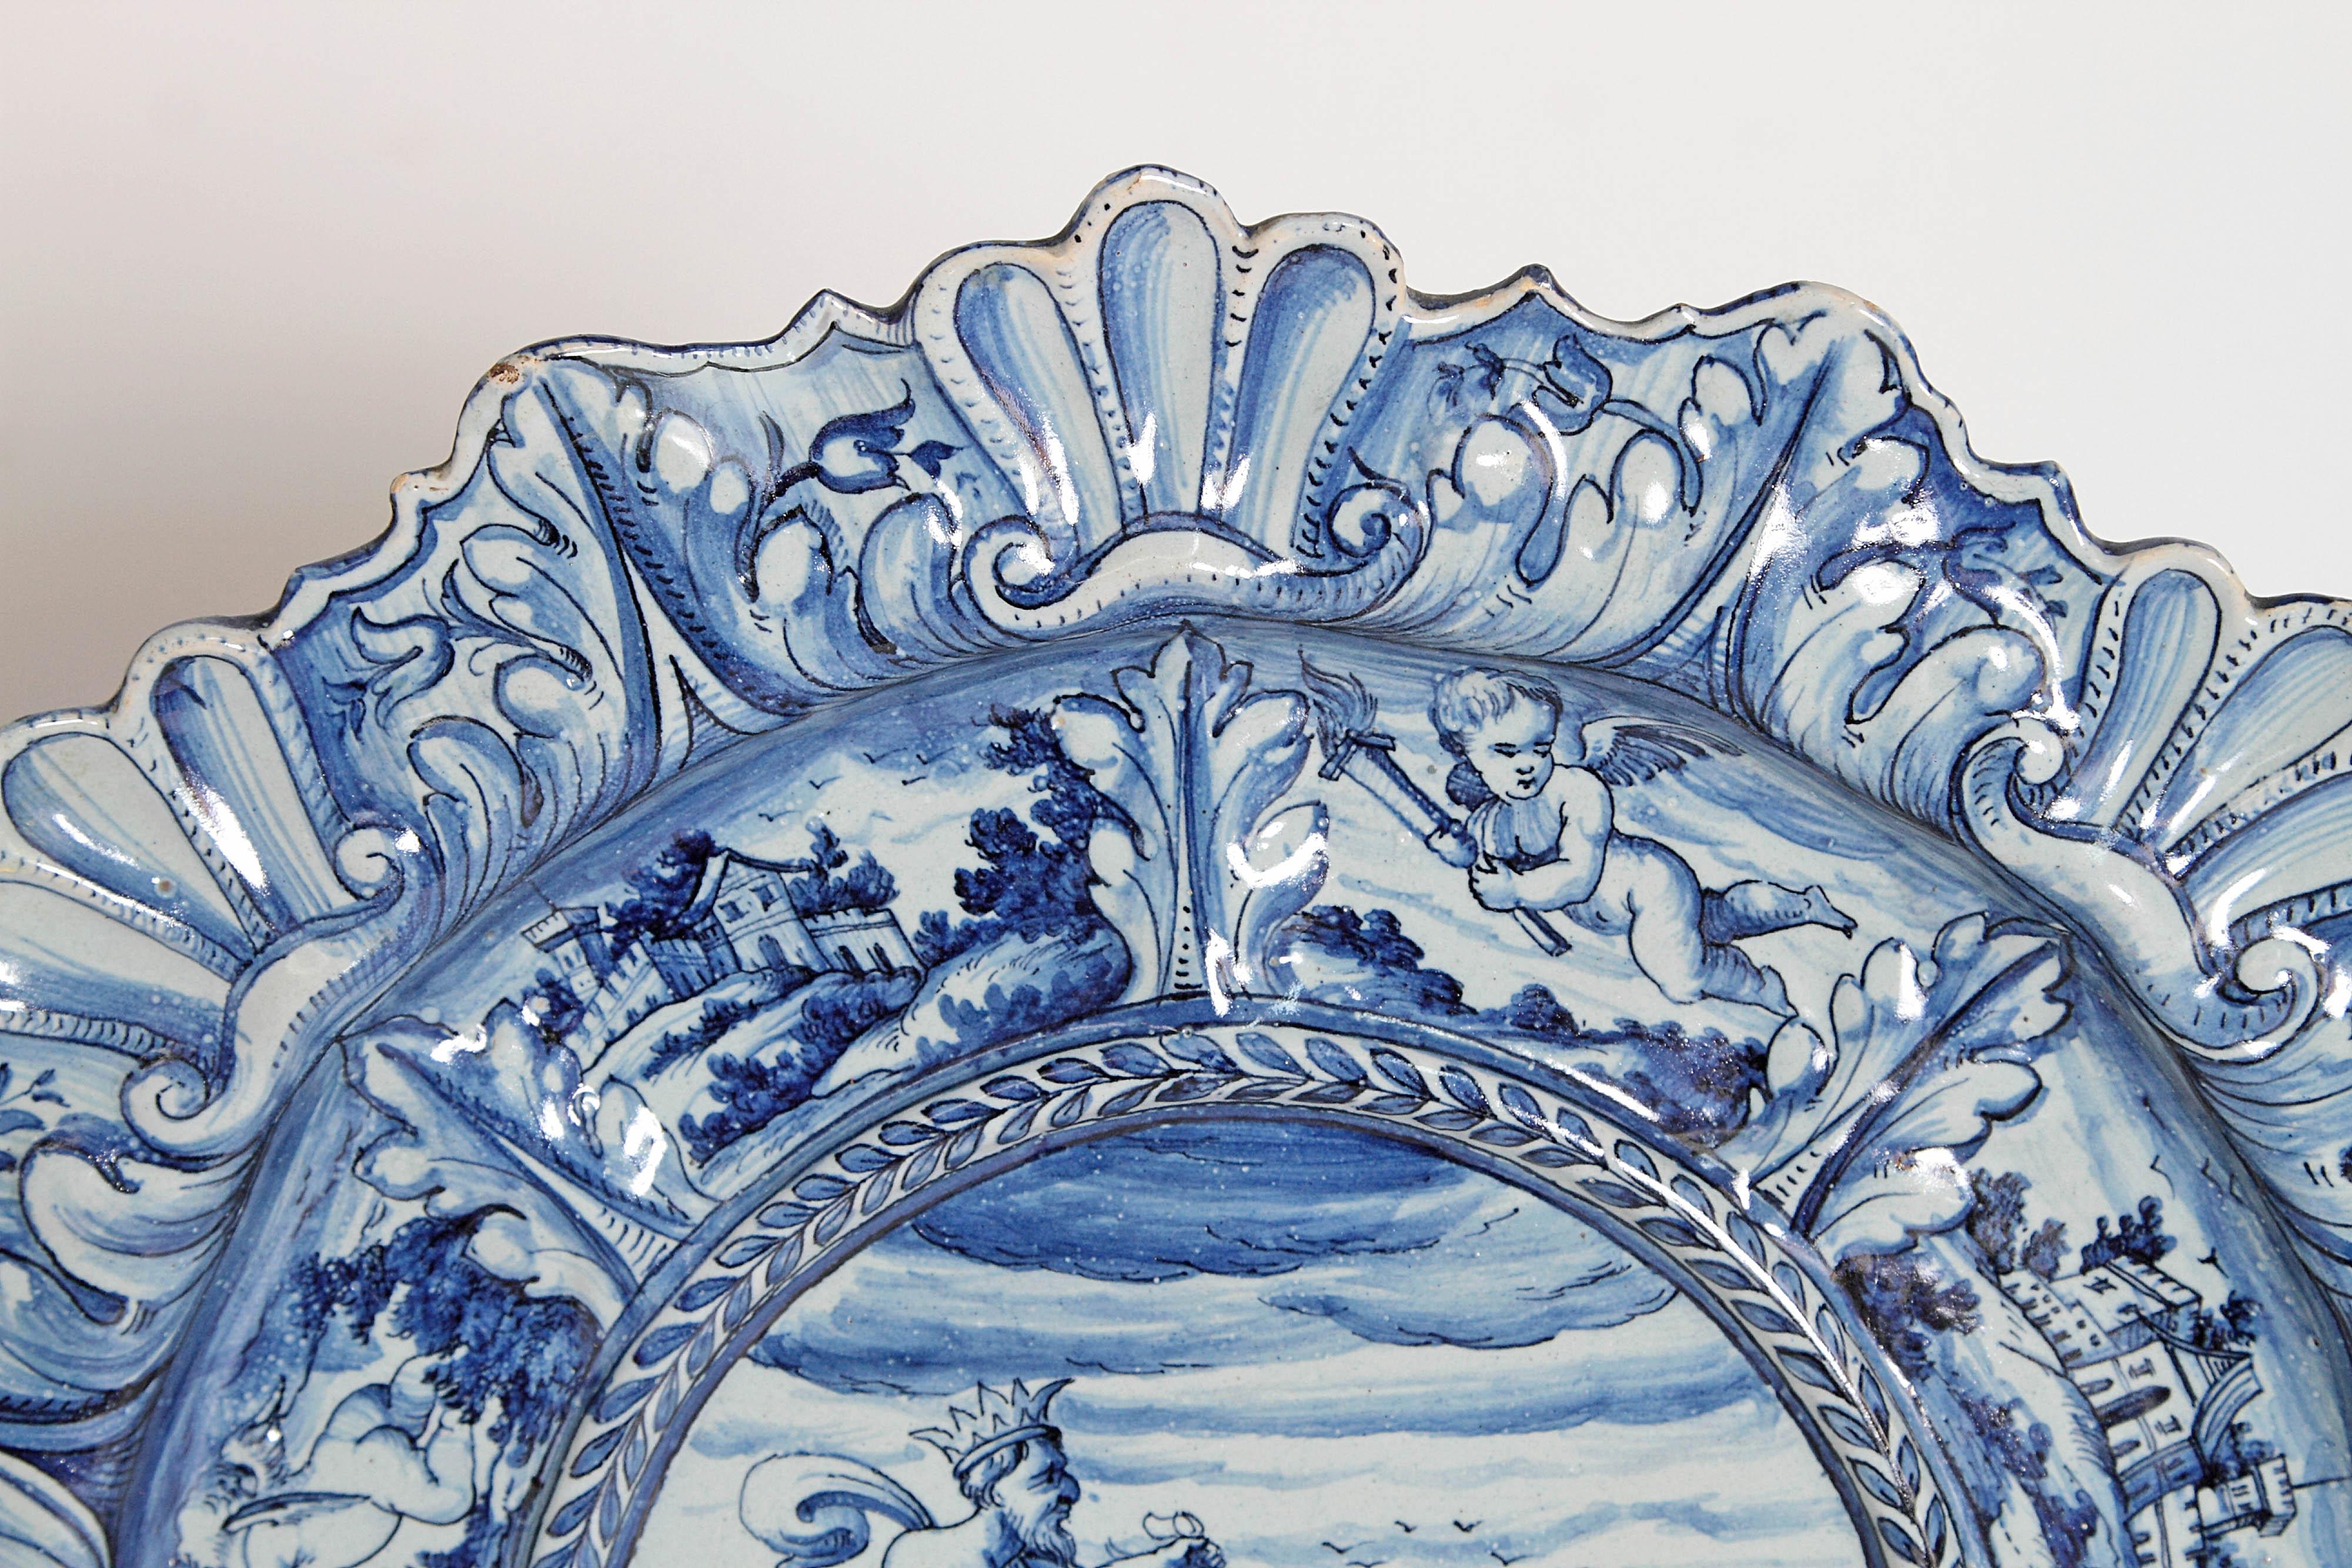 Neoclassical Mid-19th Century Blue and White Delft Italian Charger